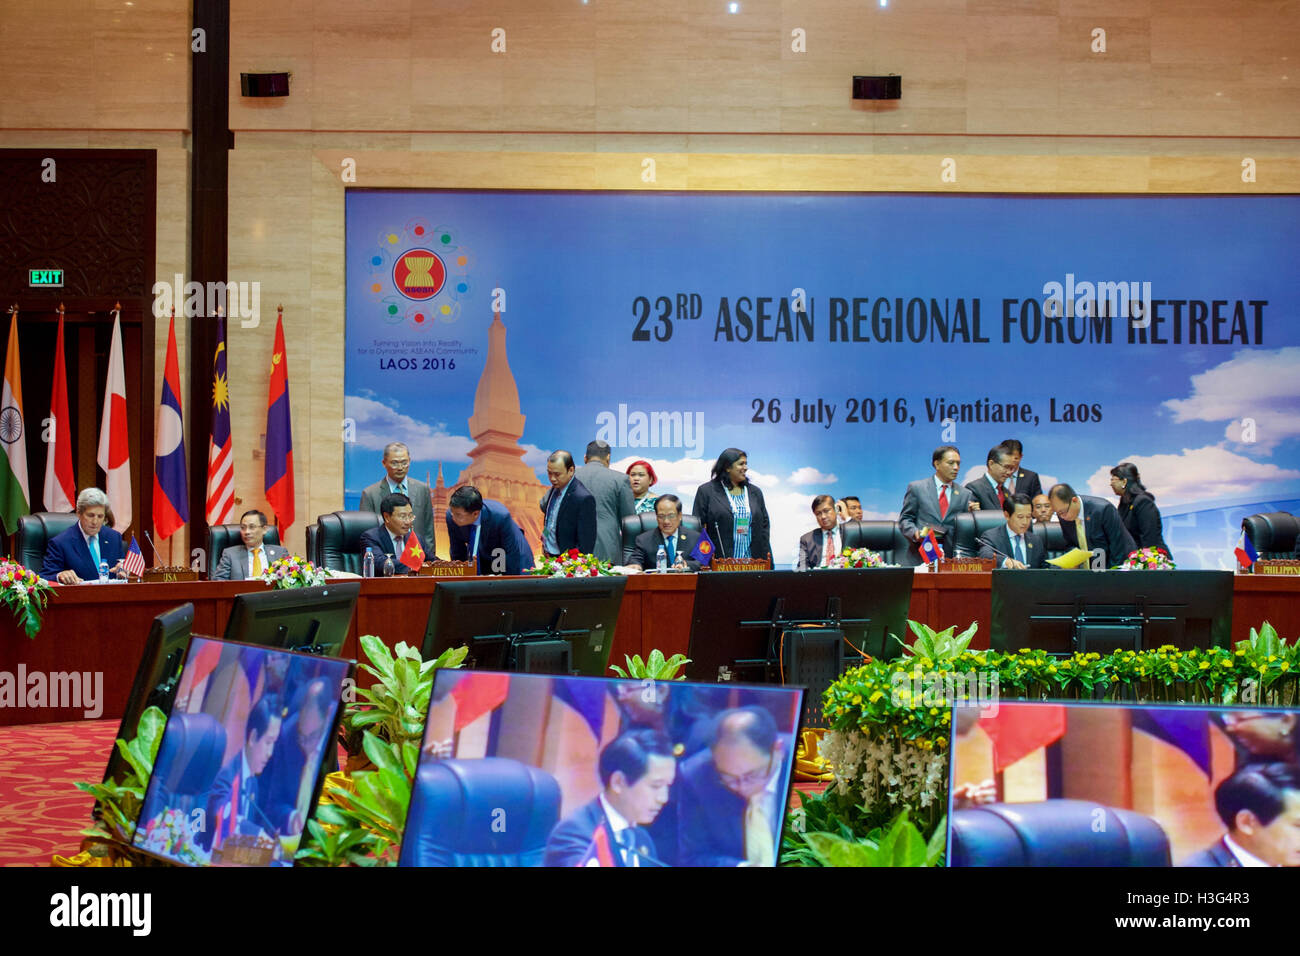 U.S. Secretary of State John Kerry sits with his fellow Foreign Ministers at the National Convention Center in Vientiane, Laos, on July 26, 2016, during a meeting of the ASEAN Regional Forum amid the annual meeting of the Association of Southeast Asian Nations (ASEAN). Stock Photo